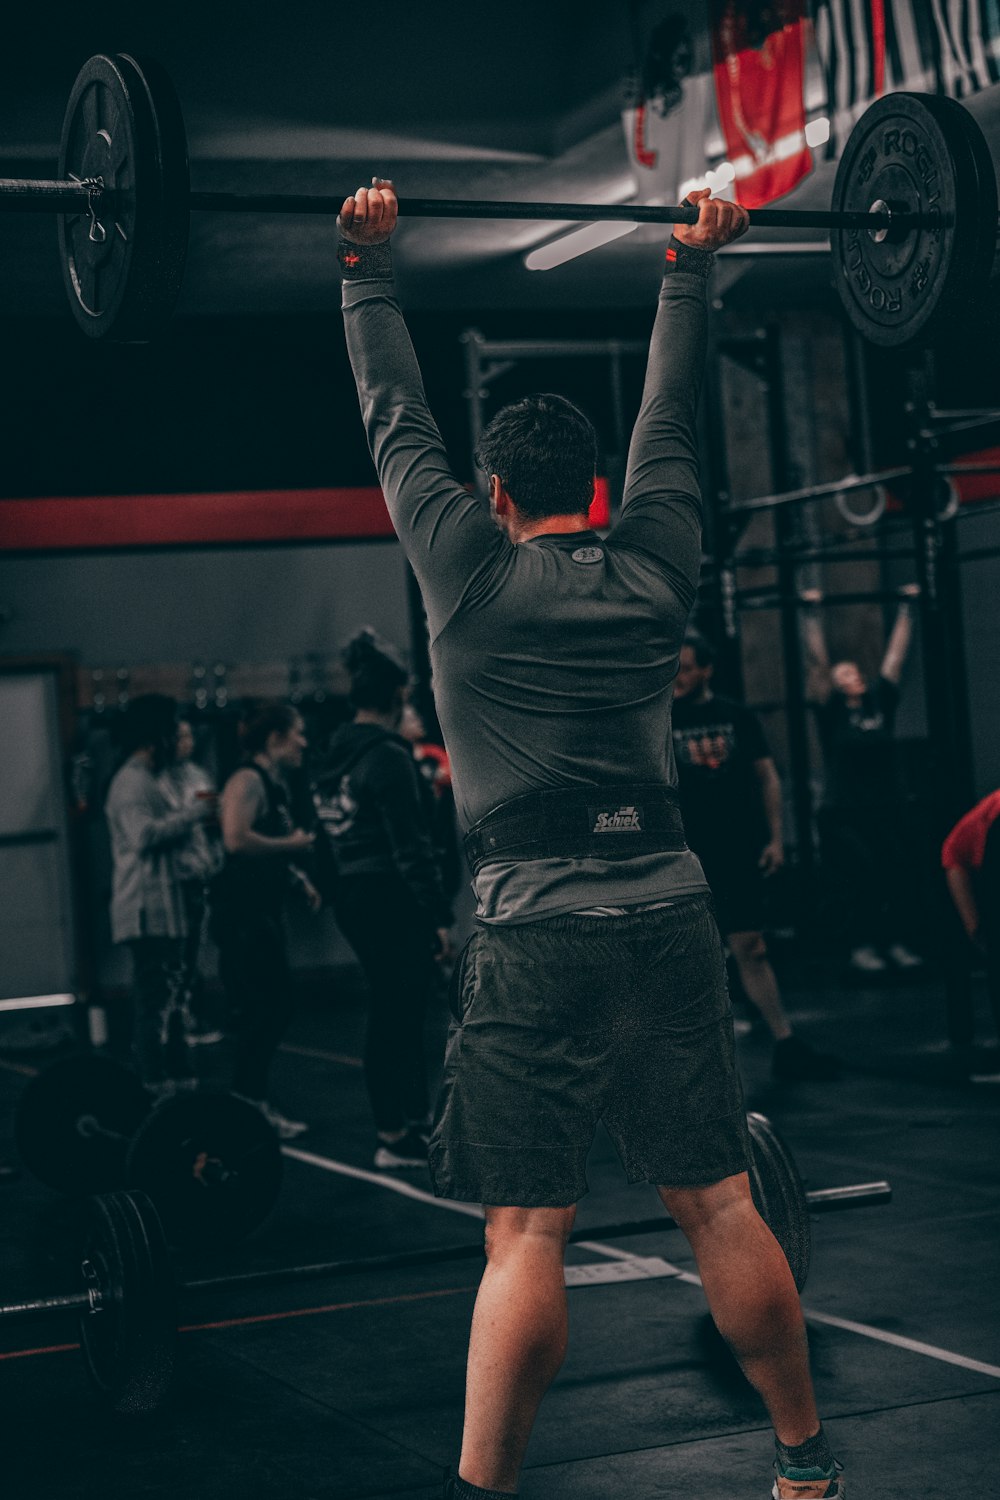 a man lifting a barbell in a gym